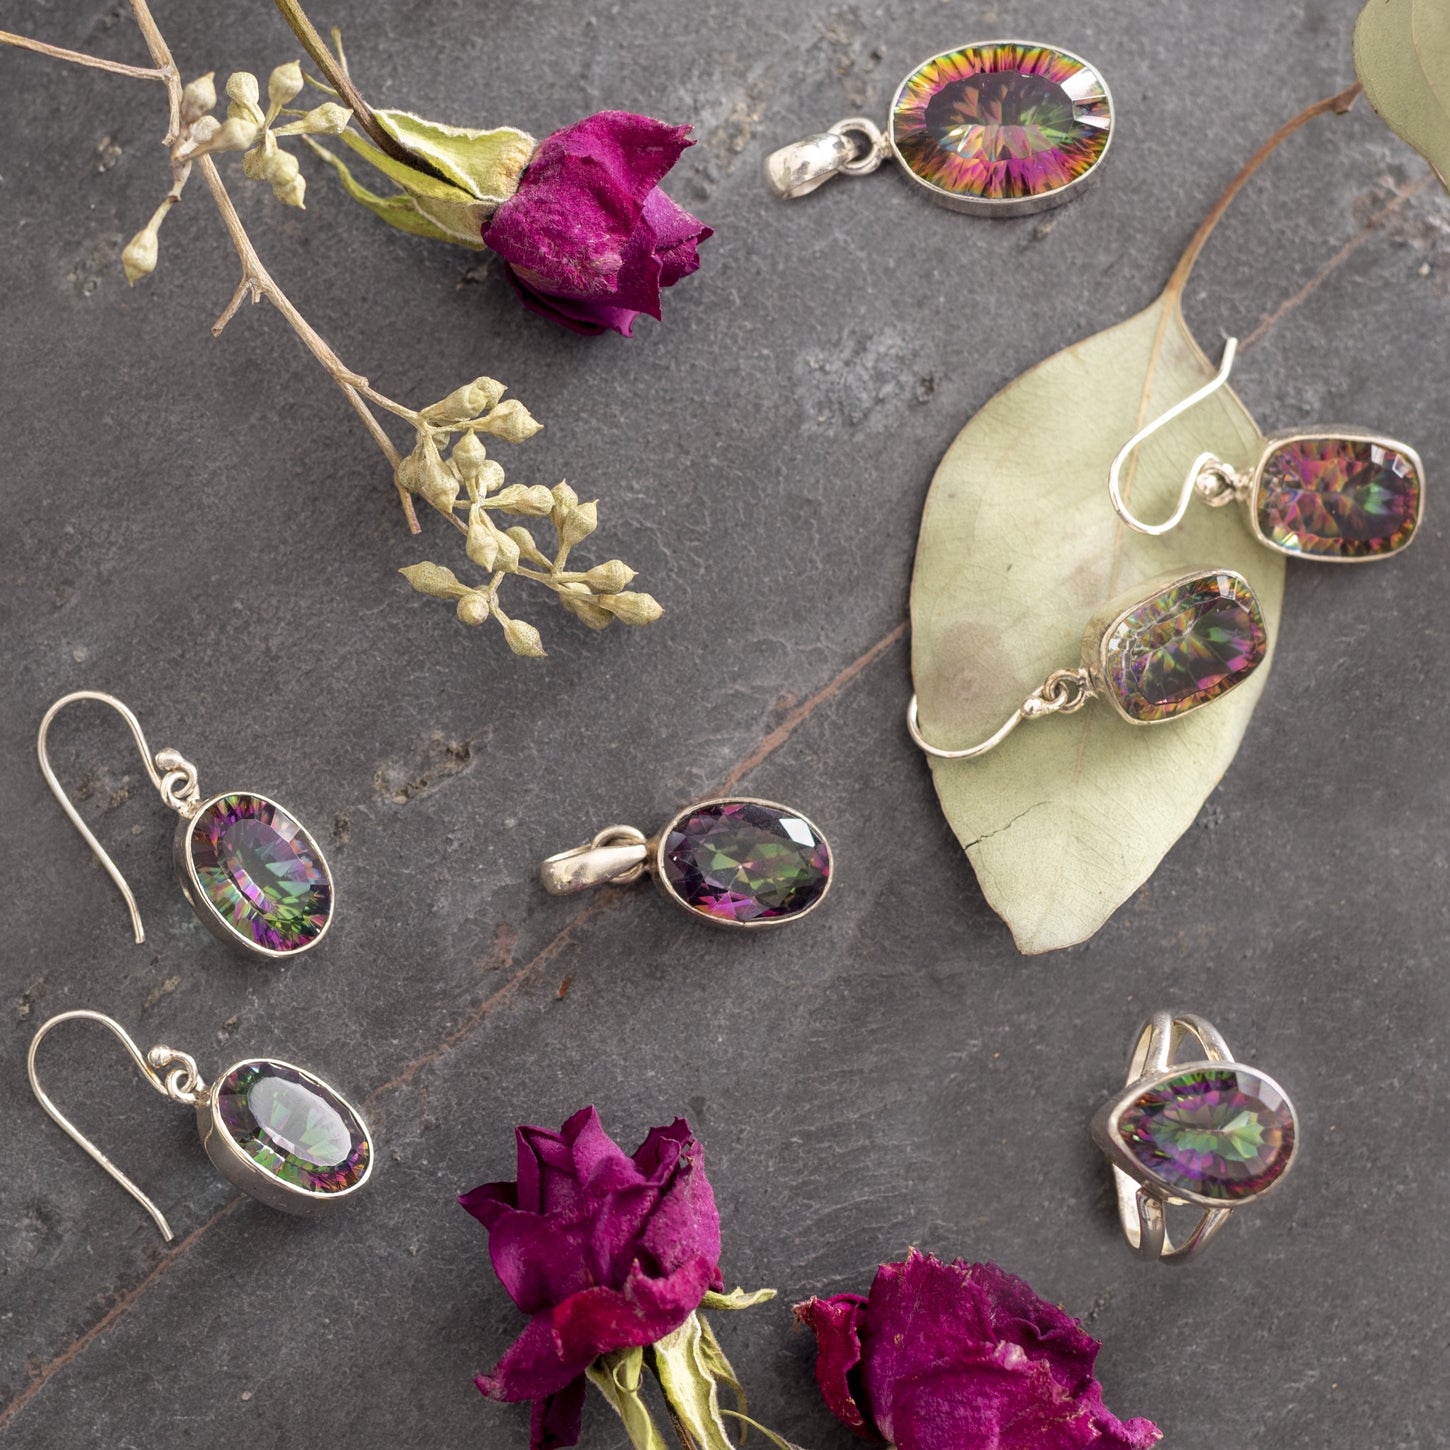 a selection of shining mystic topaz jewelry surrounded by pink flower petals